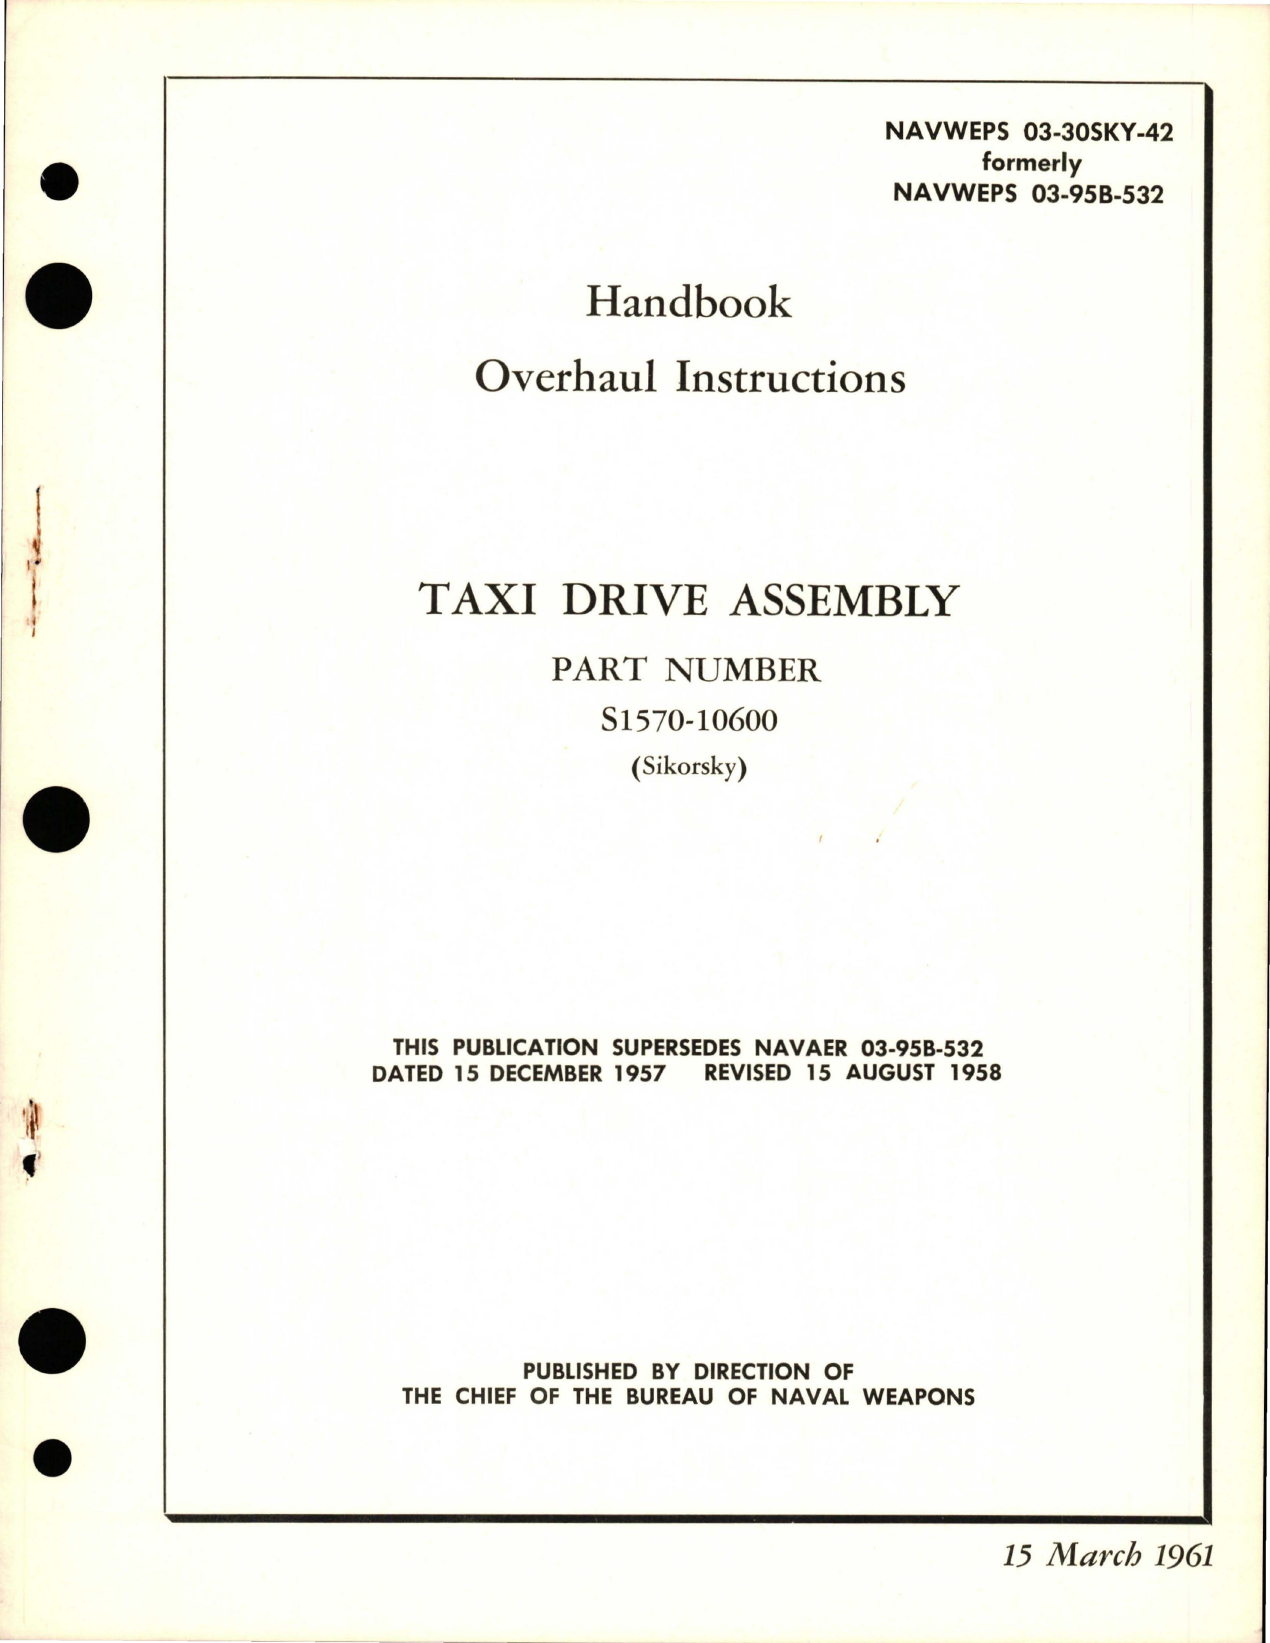 Sample page 1 from AirCorps Library document: Overhaul Instructions for Taxi Drive Assembly - Part S1570-10600